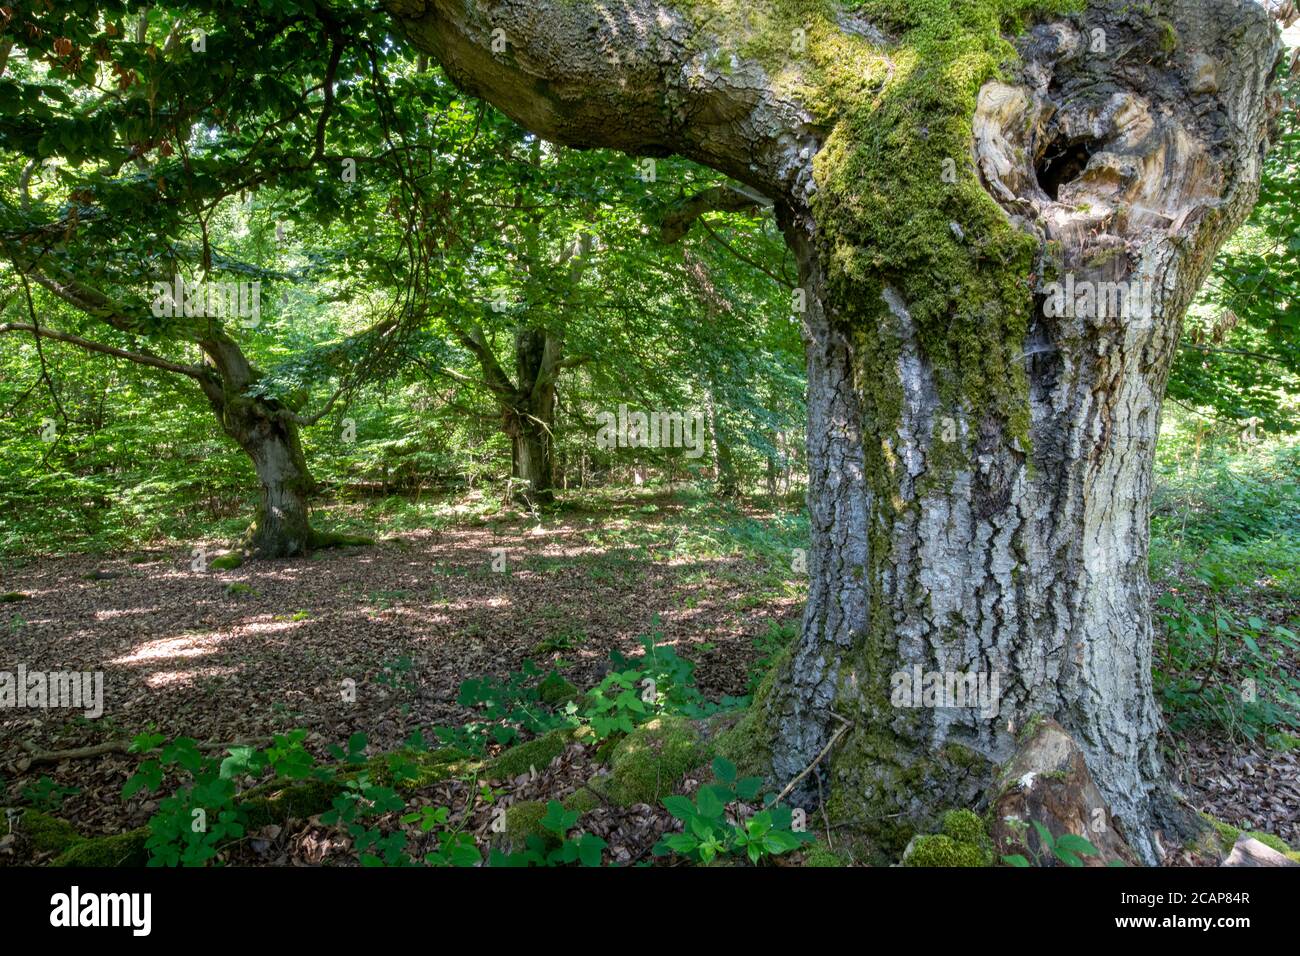 Germany. The protected Halloh beech tree forest near Kierspe was used as a wood pasture for centuries Stock Photo